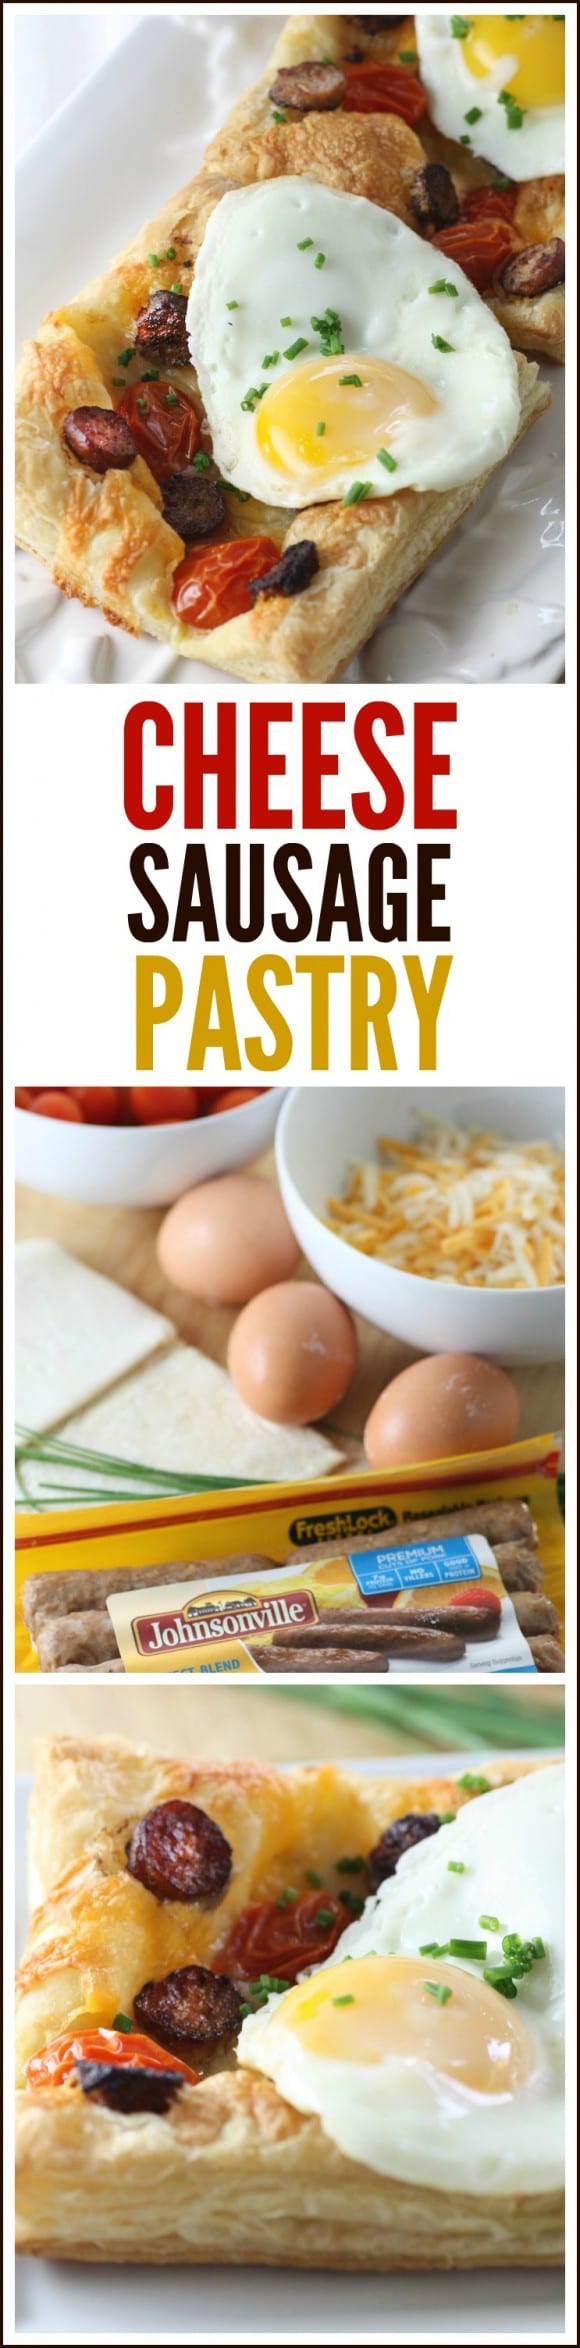 Easy Cheese Sausage Pastry Recipe | CatchMyParty.com